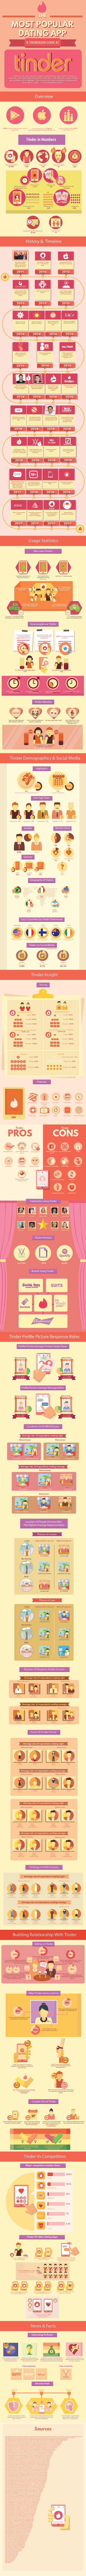 Tinder: Facts & Stats About The Most Popular Dating App #infographic